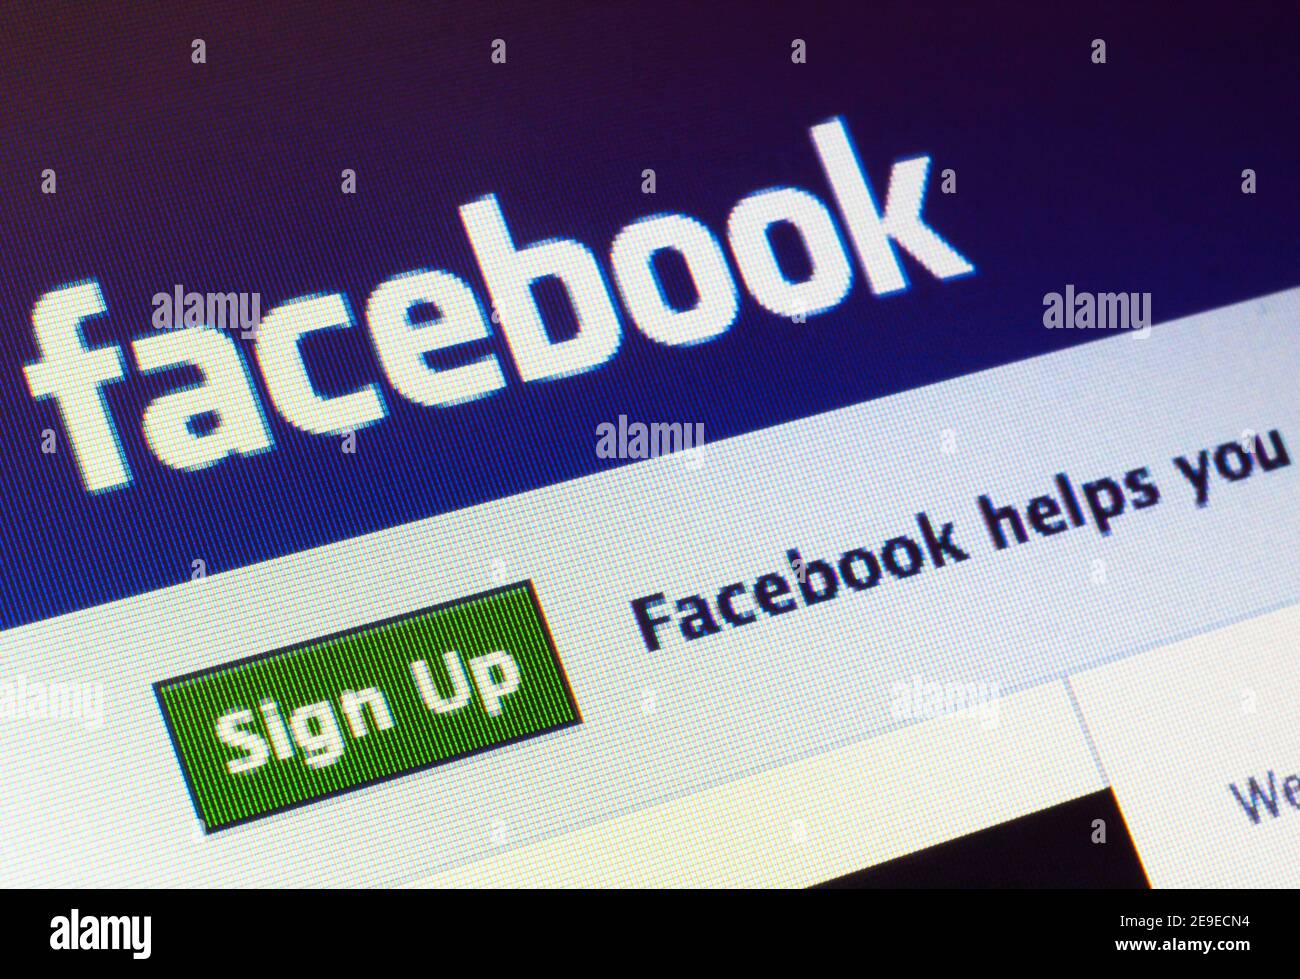 Facebook.com homepage on the screen. Facebook is an online social networking and microblogging service Stock Photo